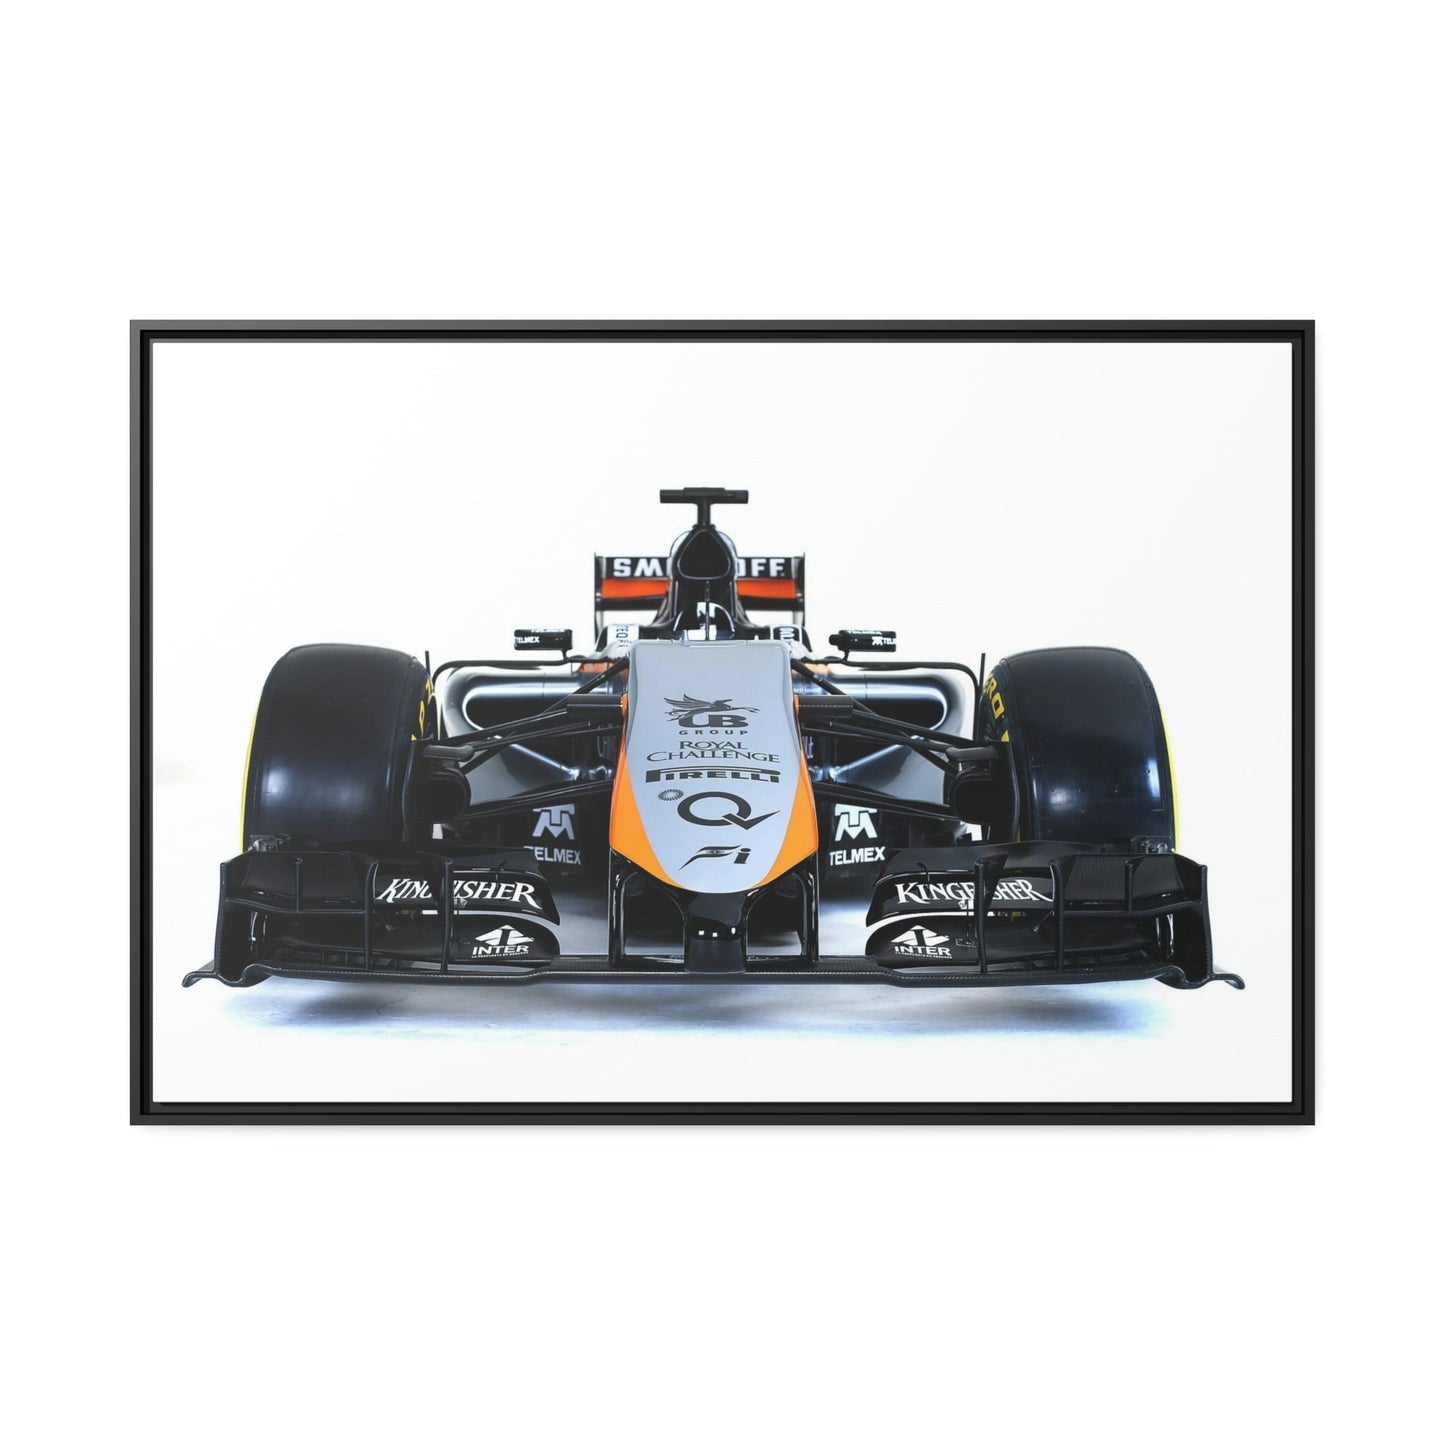 The Need for Speed: Framed Canvas Print of F1 Cars